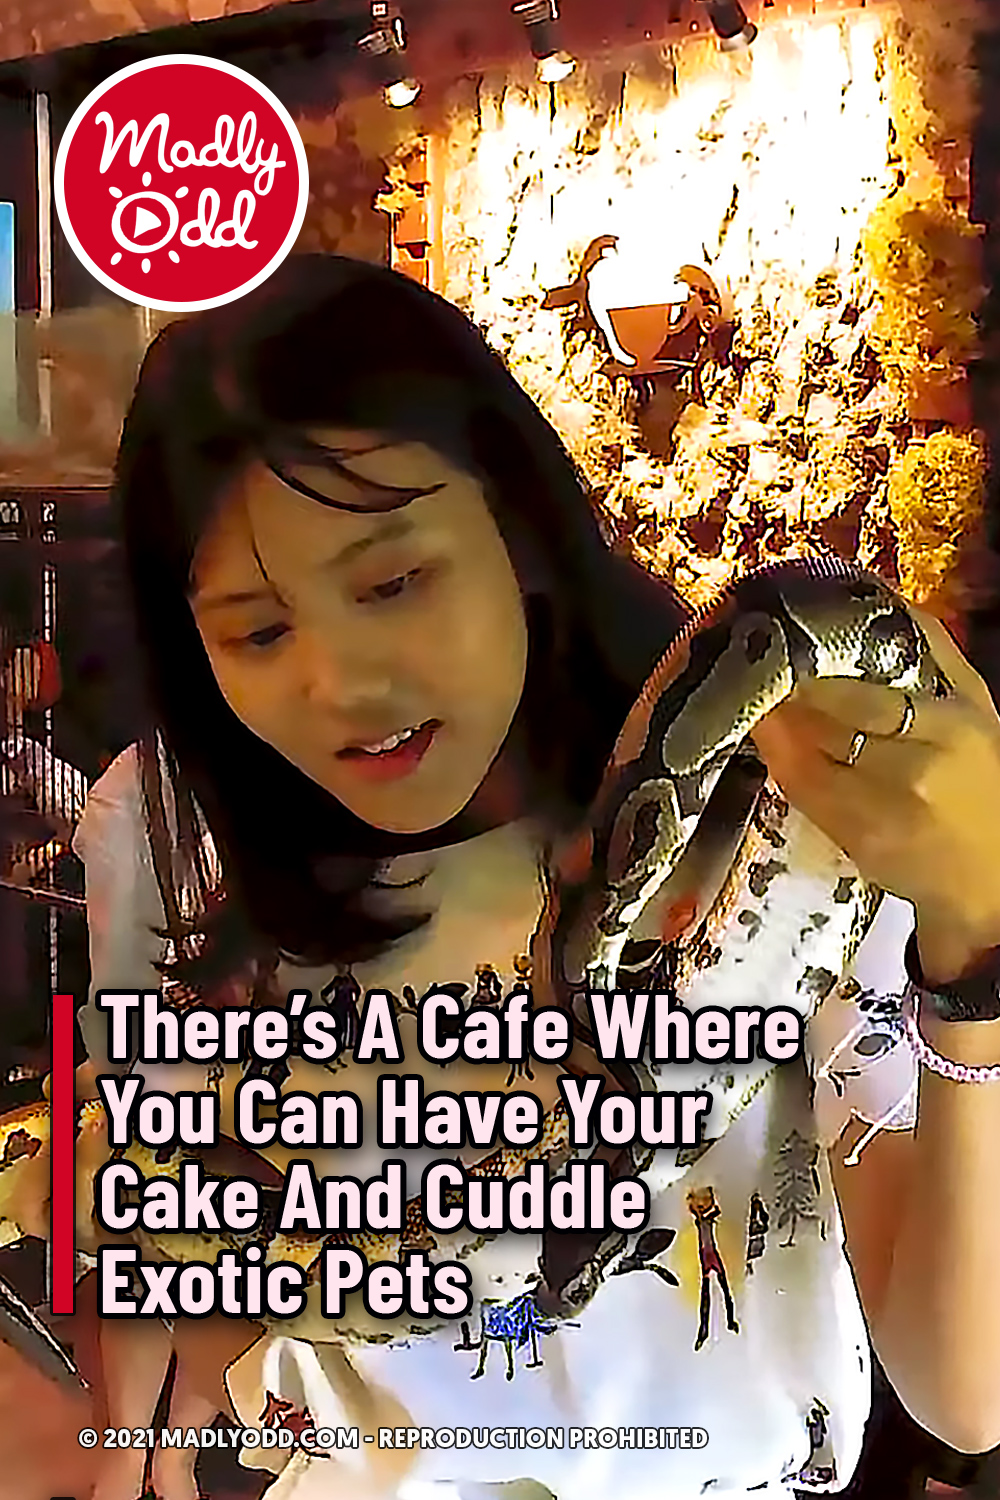 There’s A Cafe Where You Can Have Your Cake And Cuddle Exotic Pets